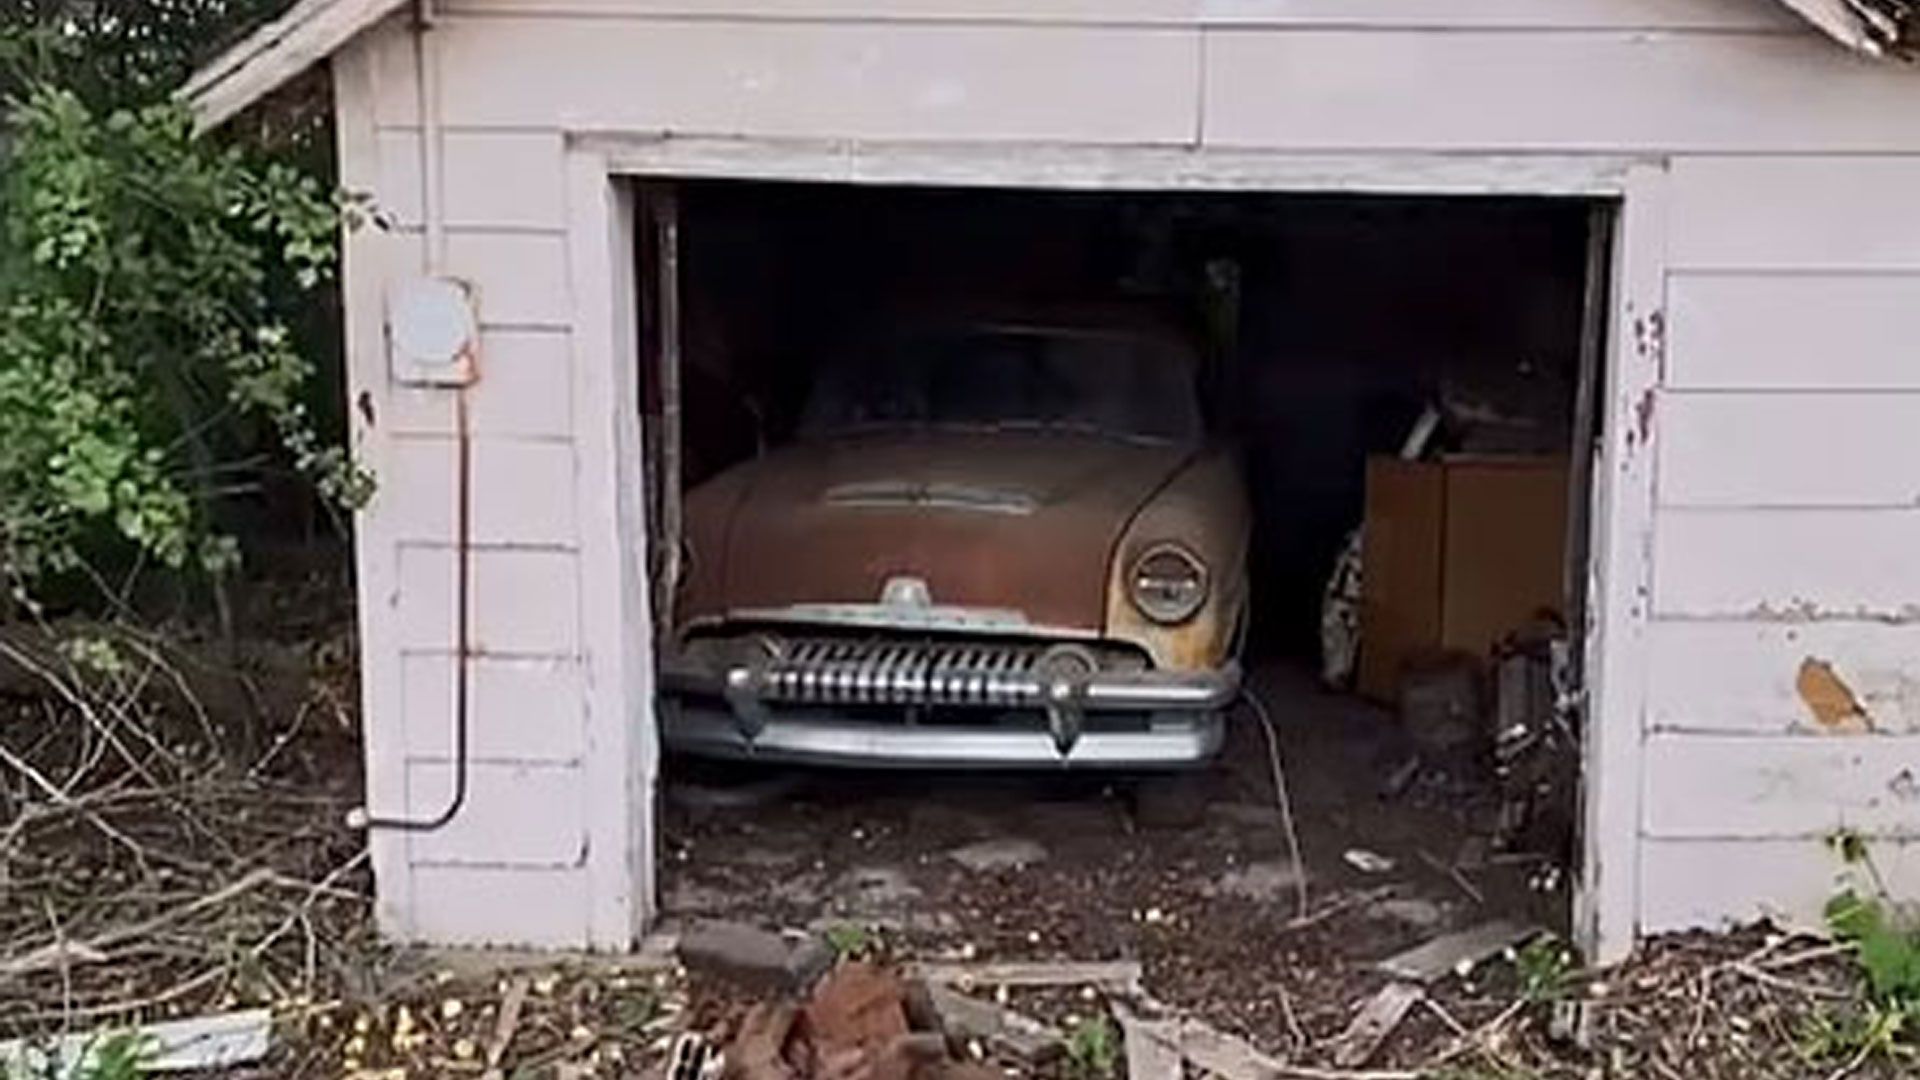 An Abandoned Garage Reveals Treasures of the Past